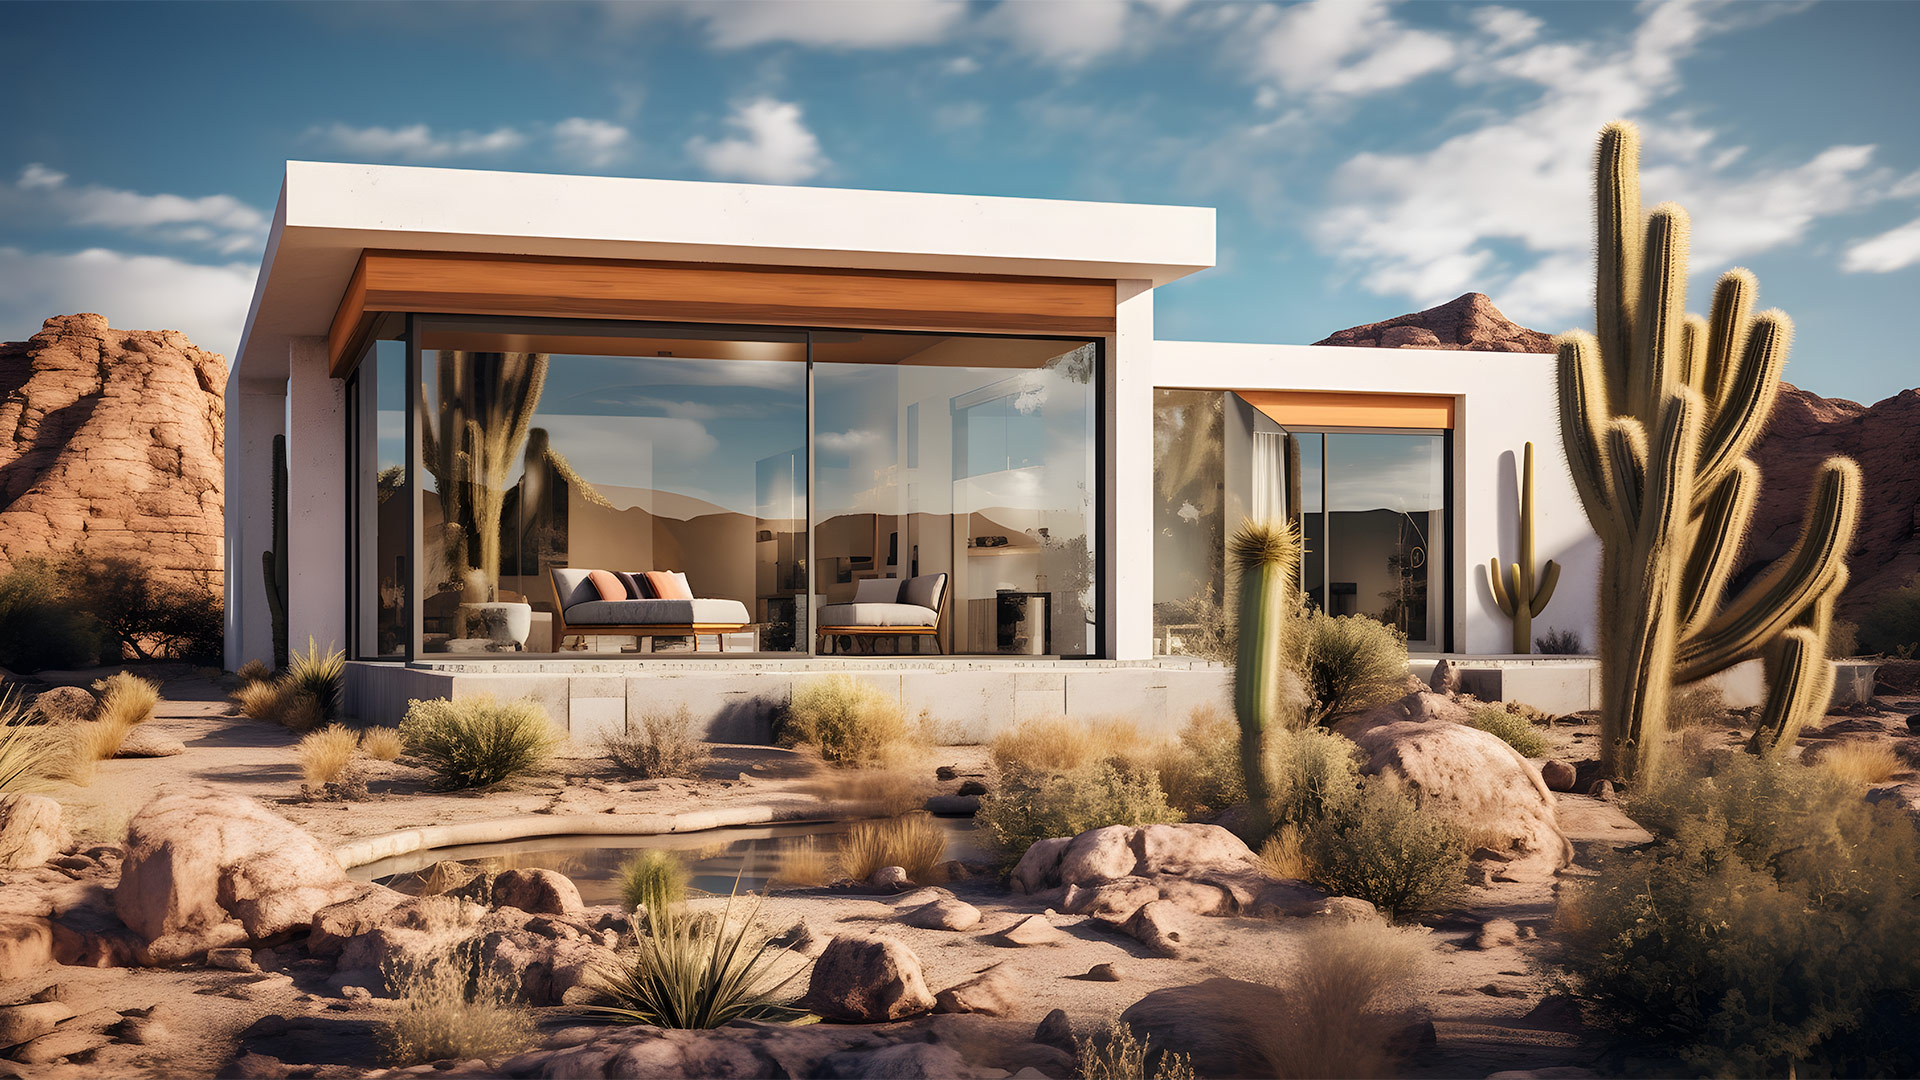 Desert Texas Home With Large Glass Windows